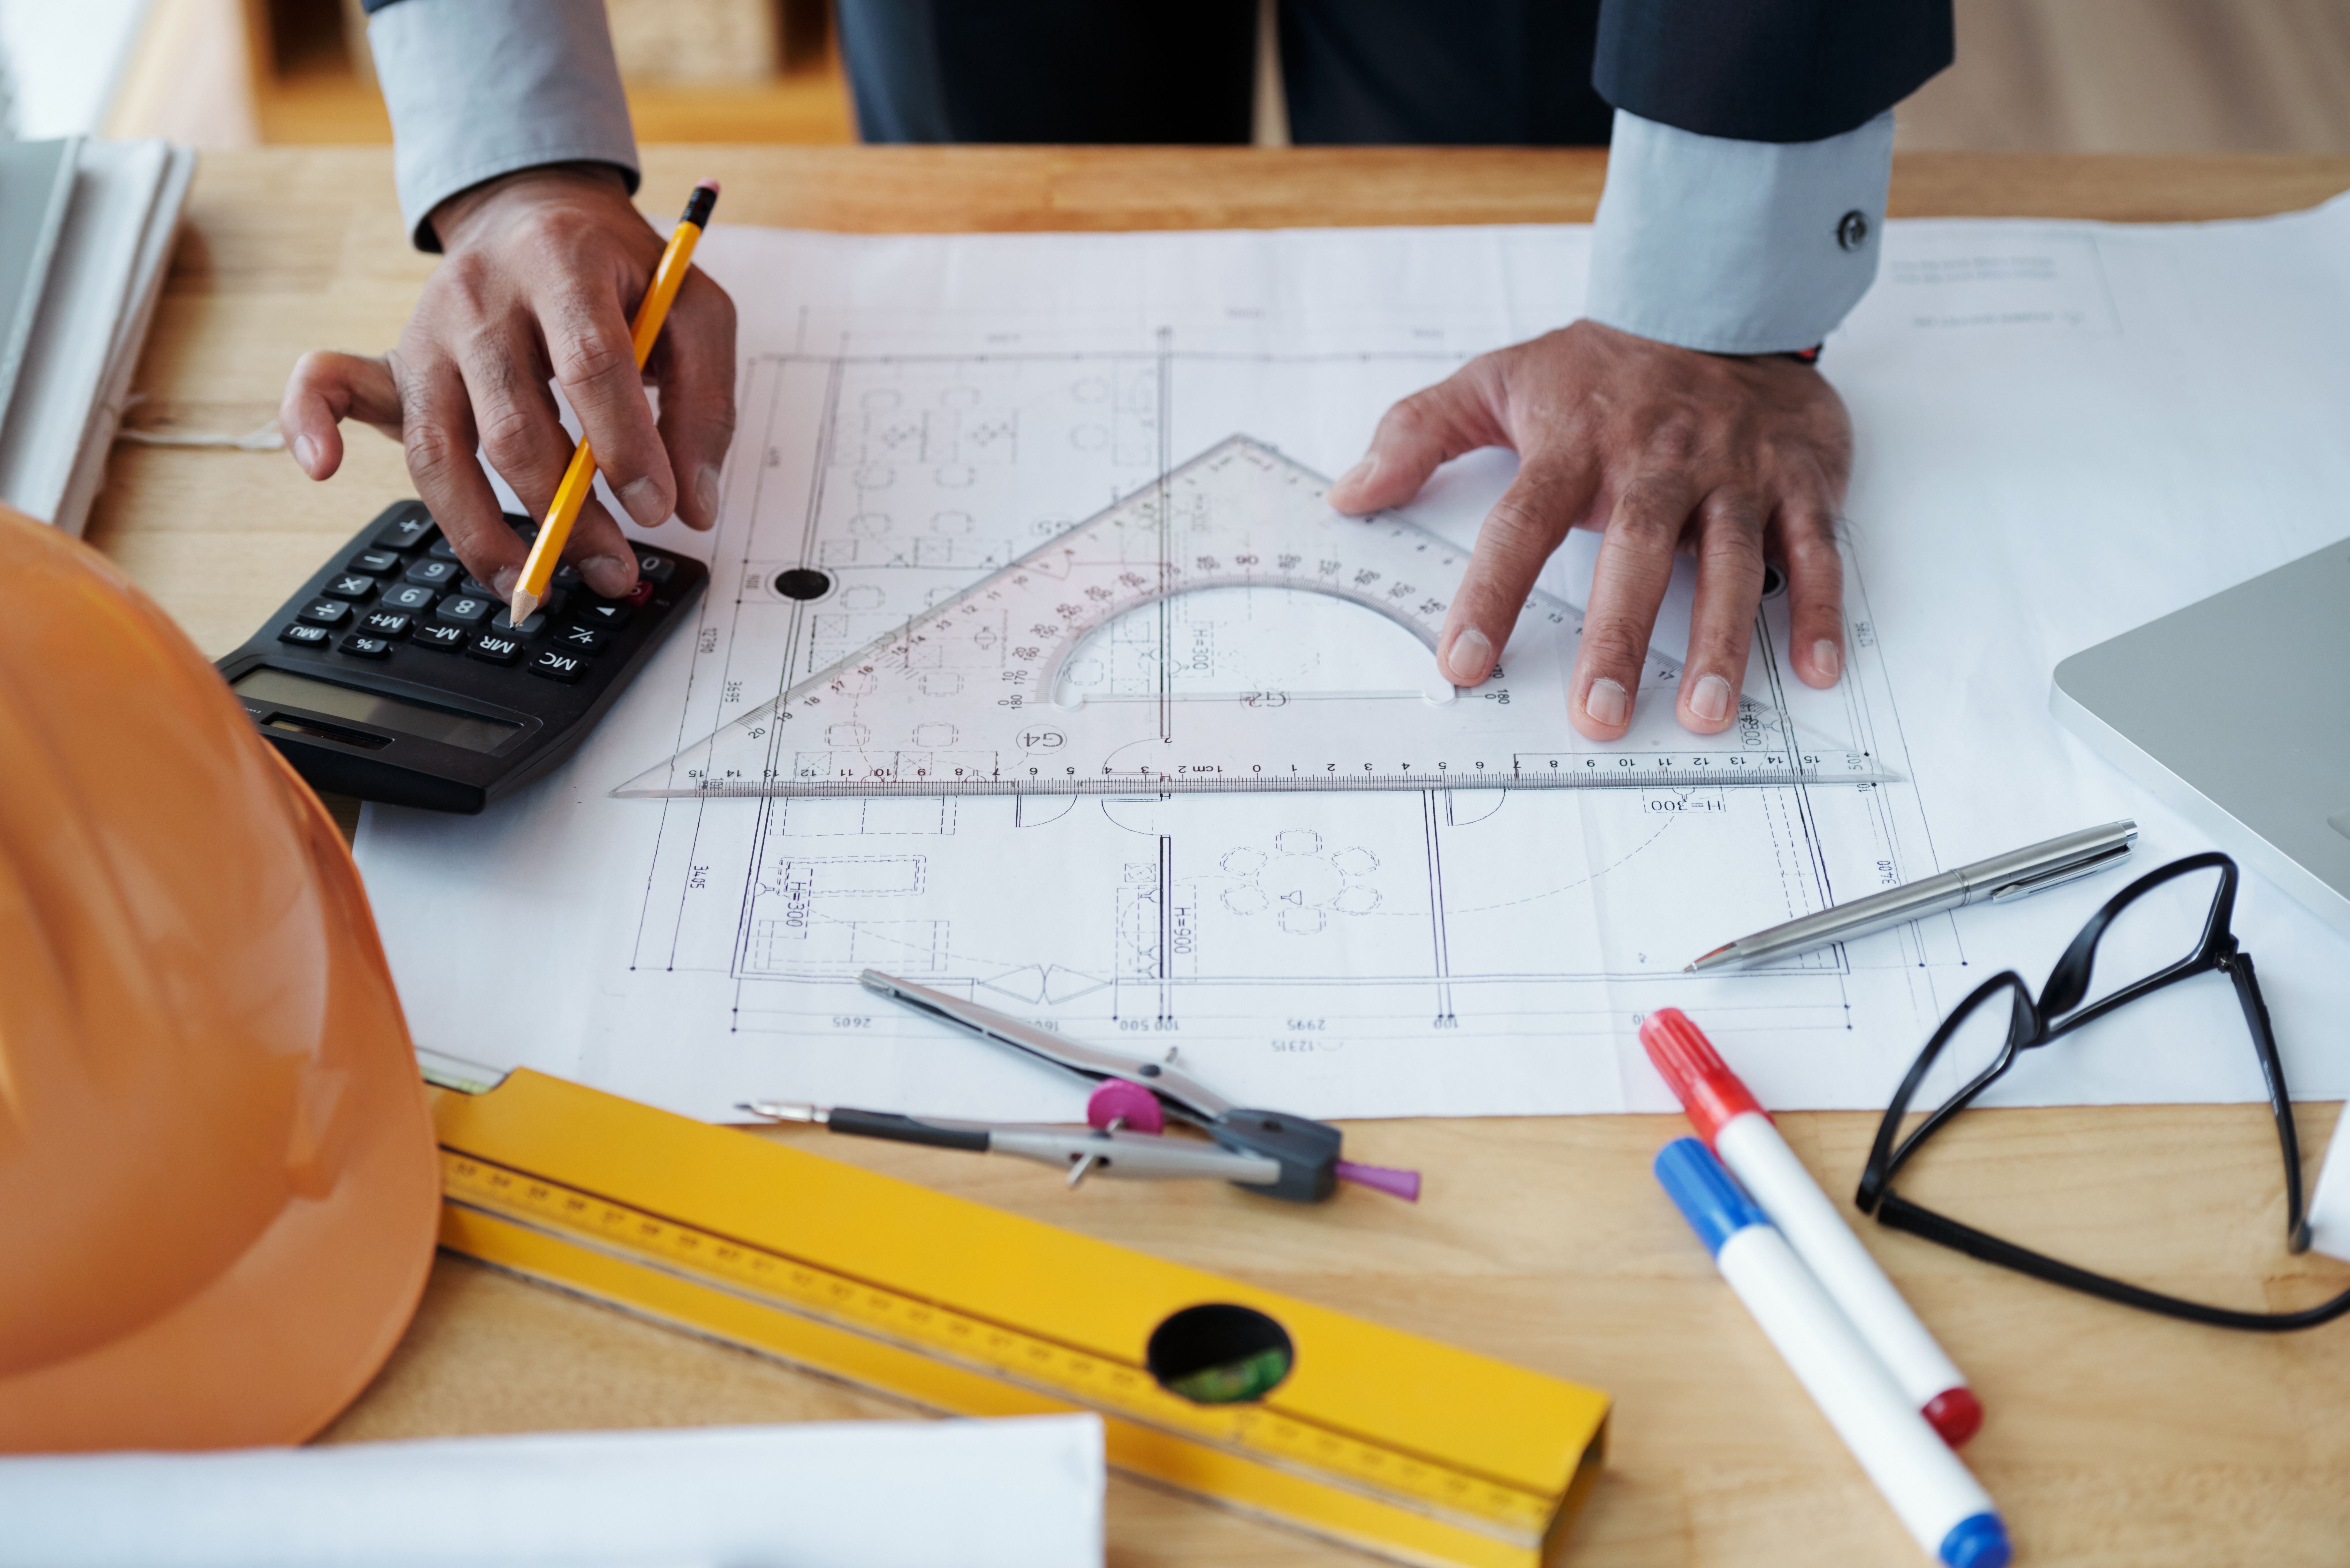 hands-unrecognizable-male-architect-working-technical-drawing-using-calculator.jpg